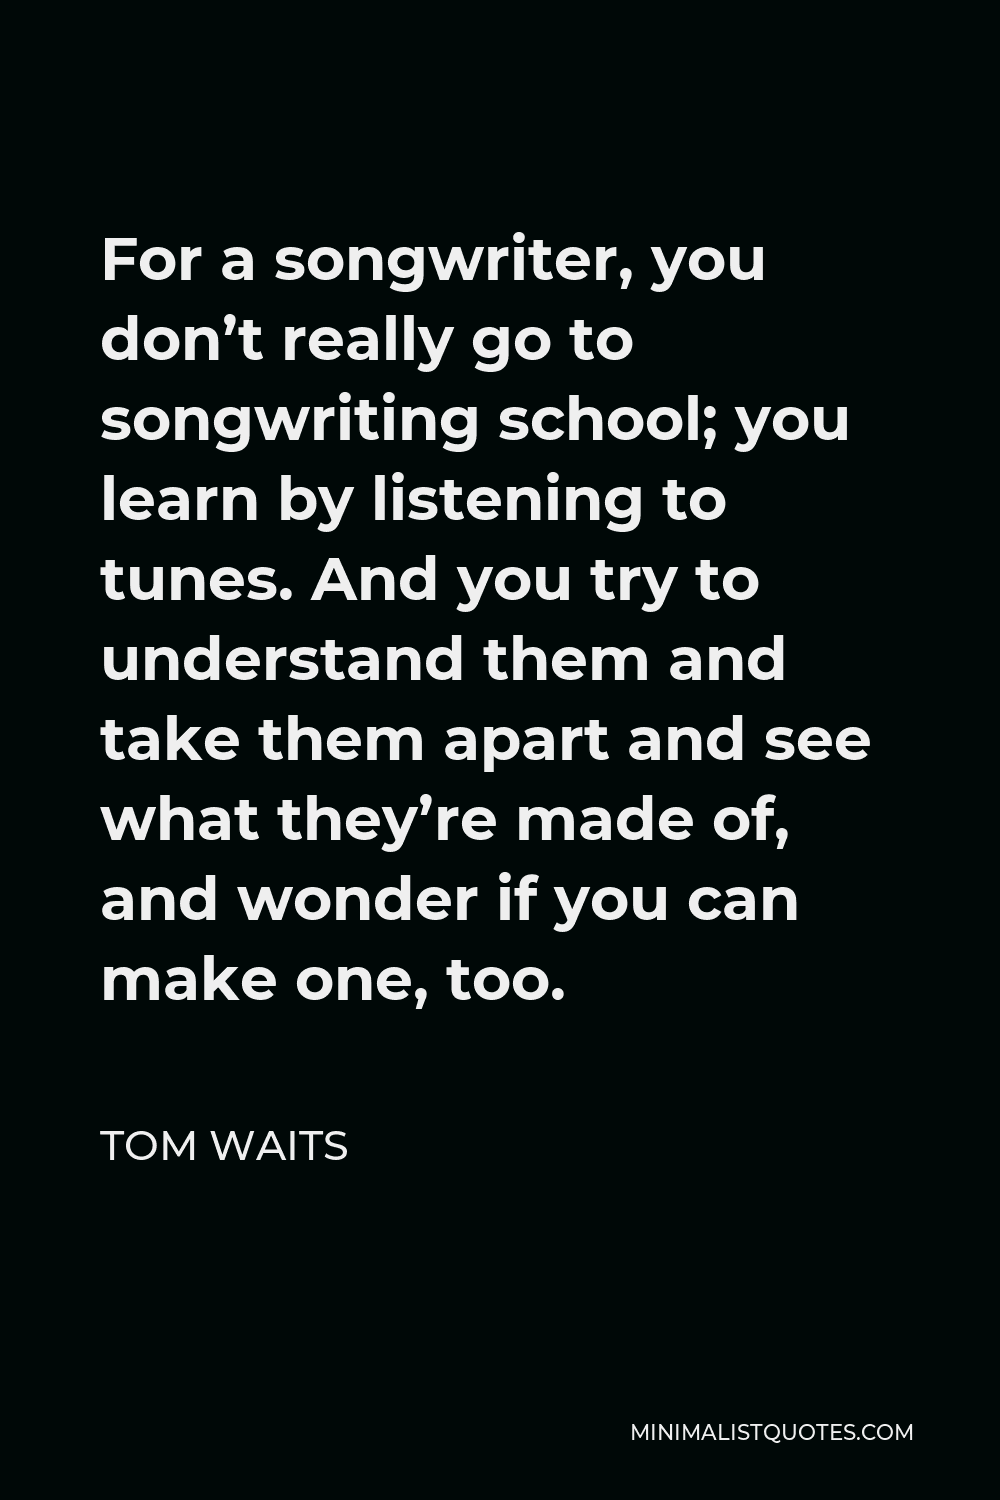 Tom Waits Quote - For a songwriter, you don’t really go to songwriting school; you learn by listening to tunes. And you try to understand them and take them apart and see what they’re made of, and wonder if you can make one, too.